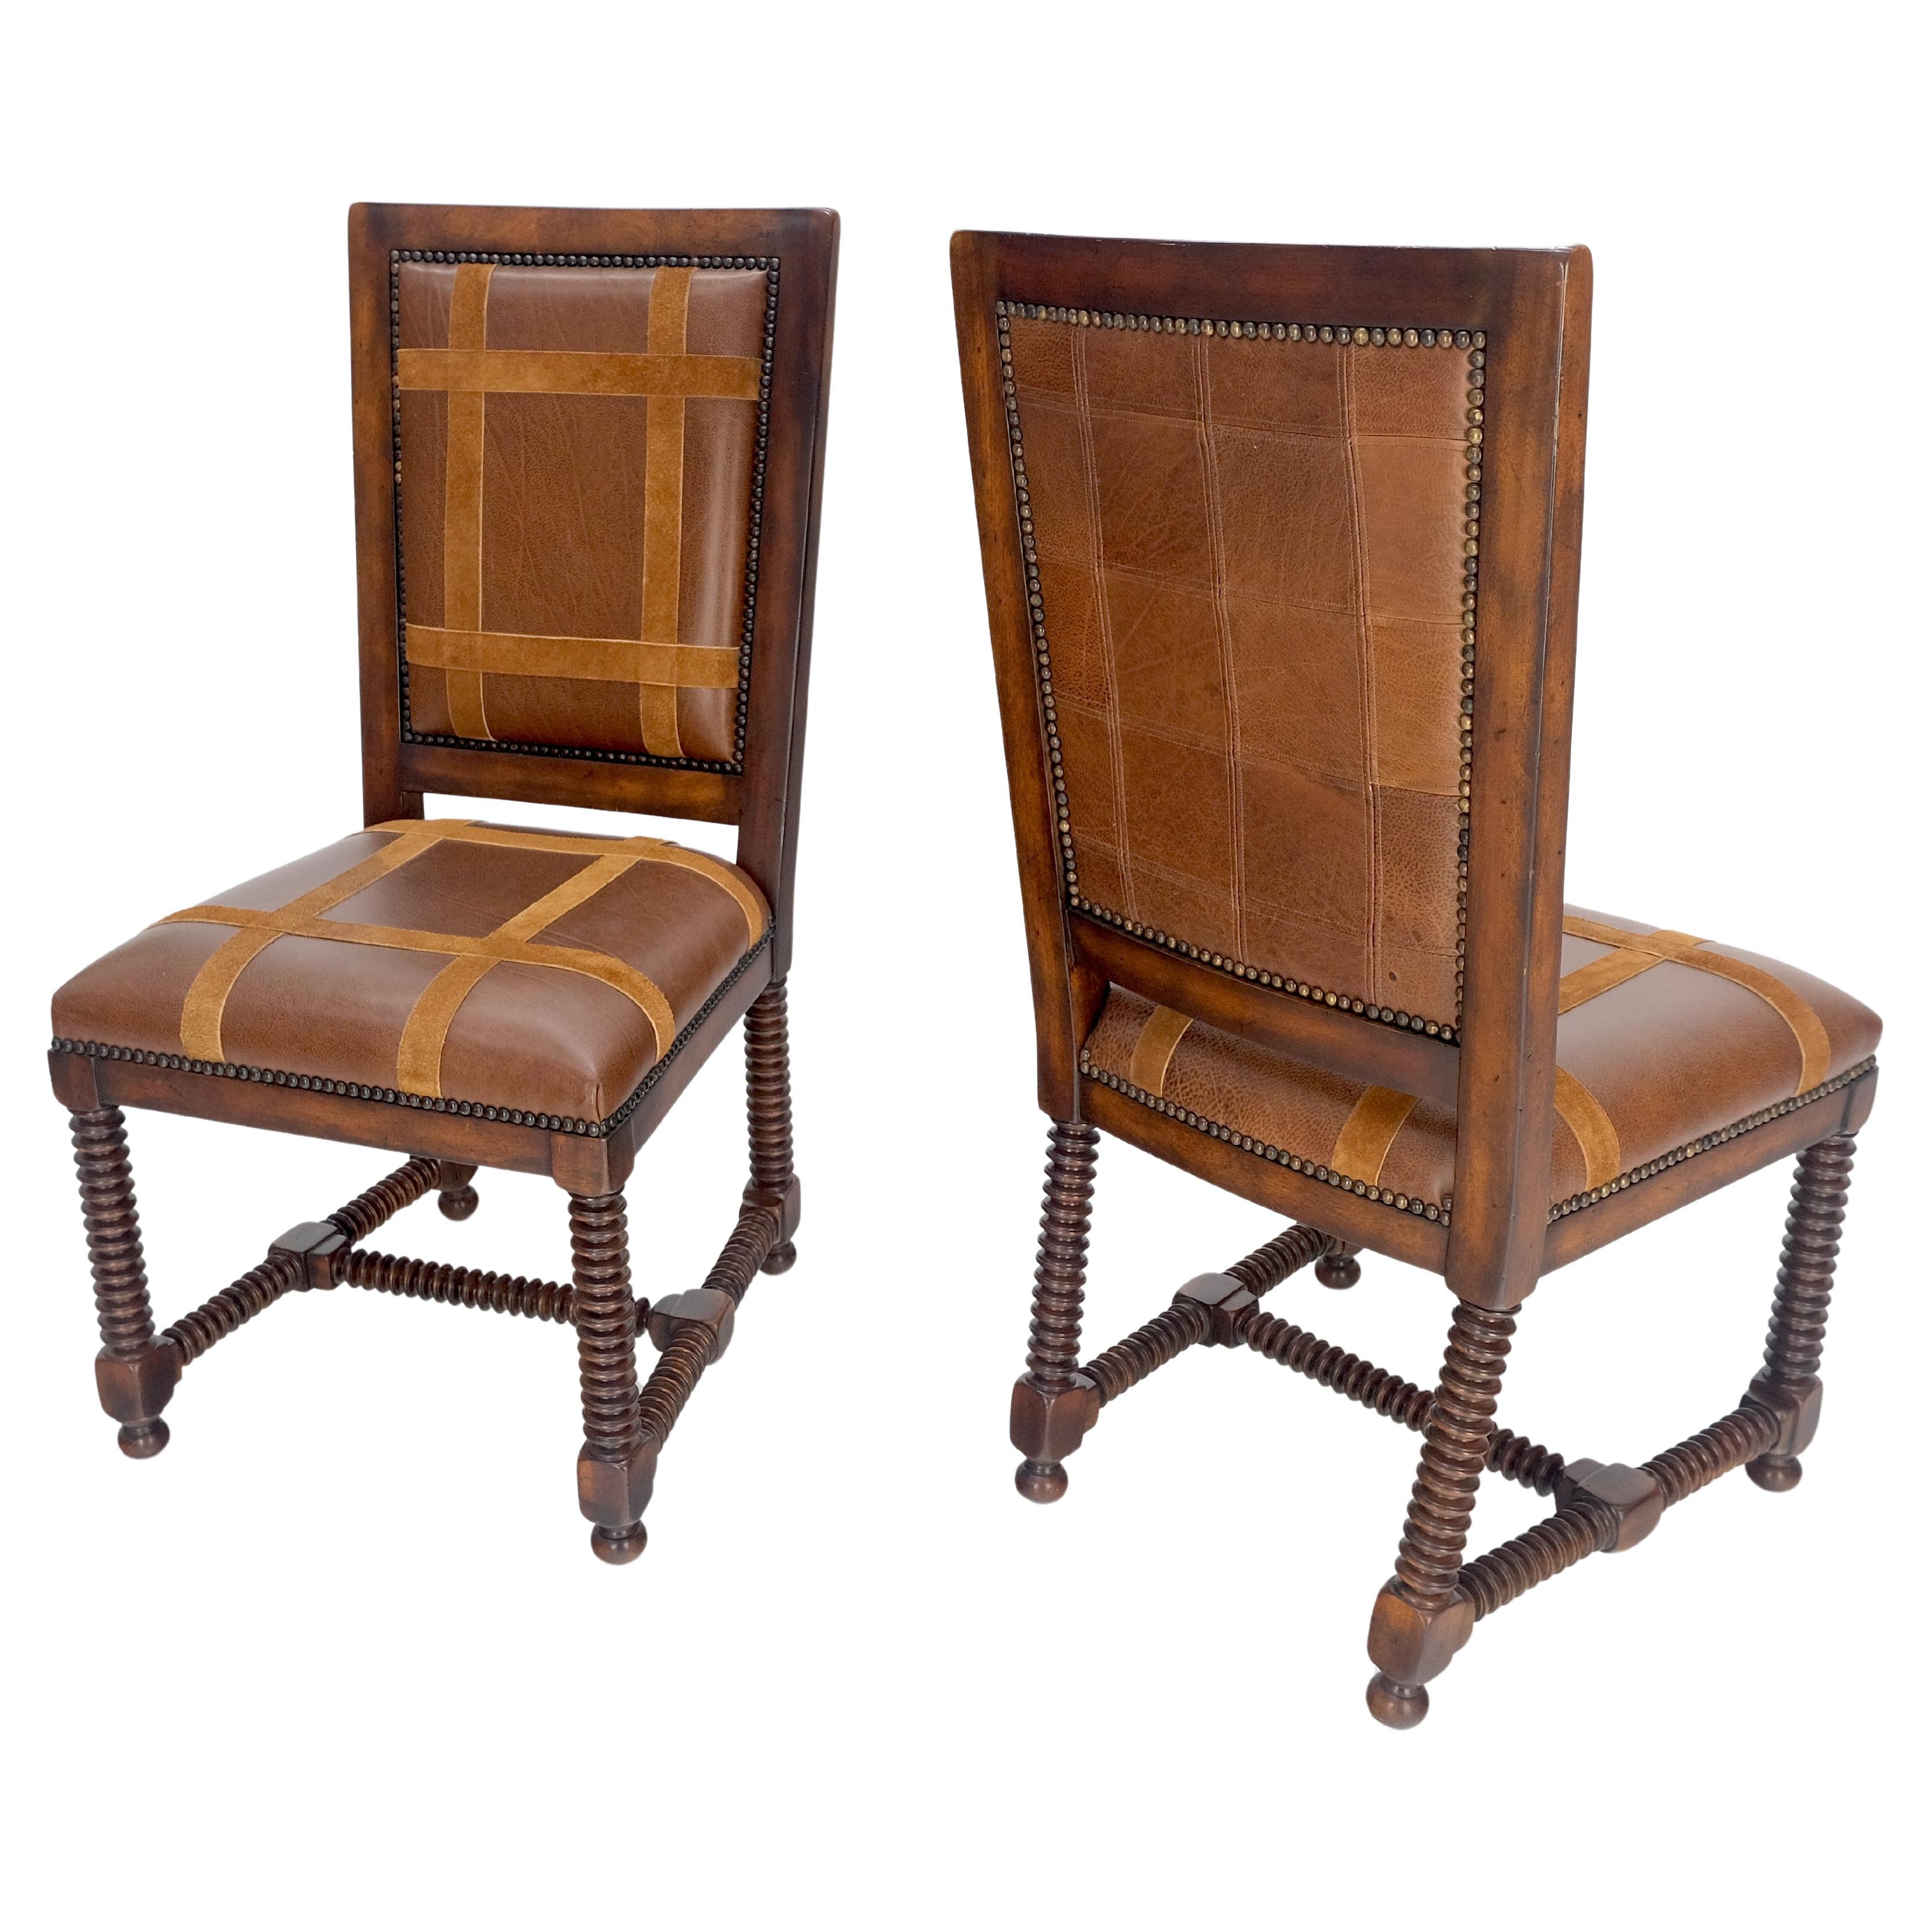 Pair of Turned Legs & Stretchers Large Leather Upholstery Side Chairs MINT!